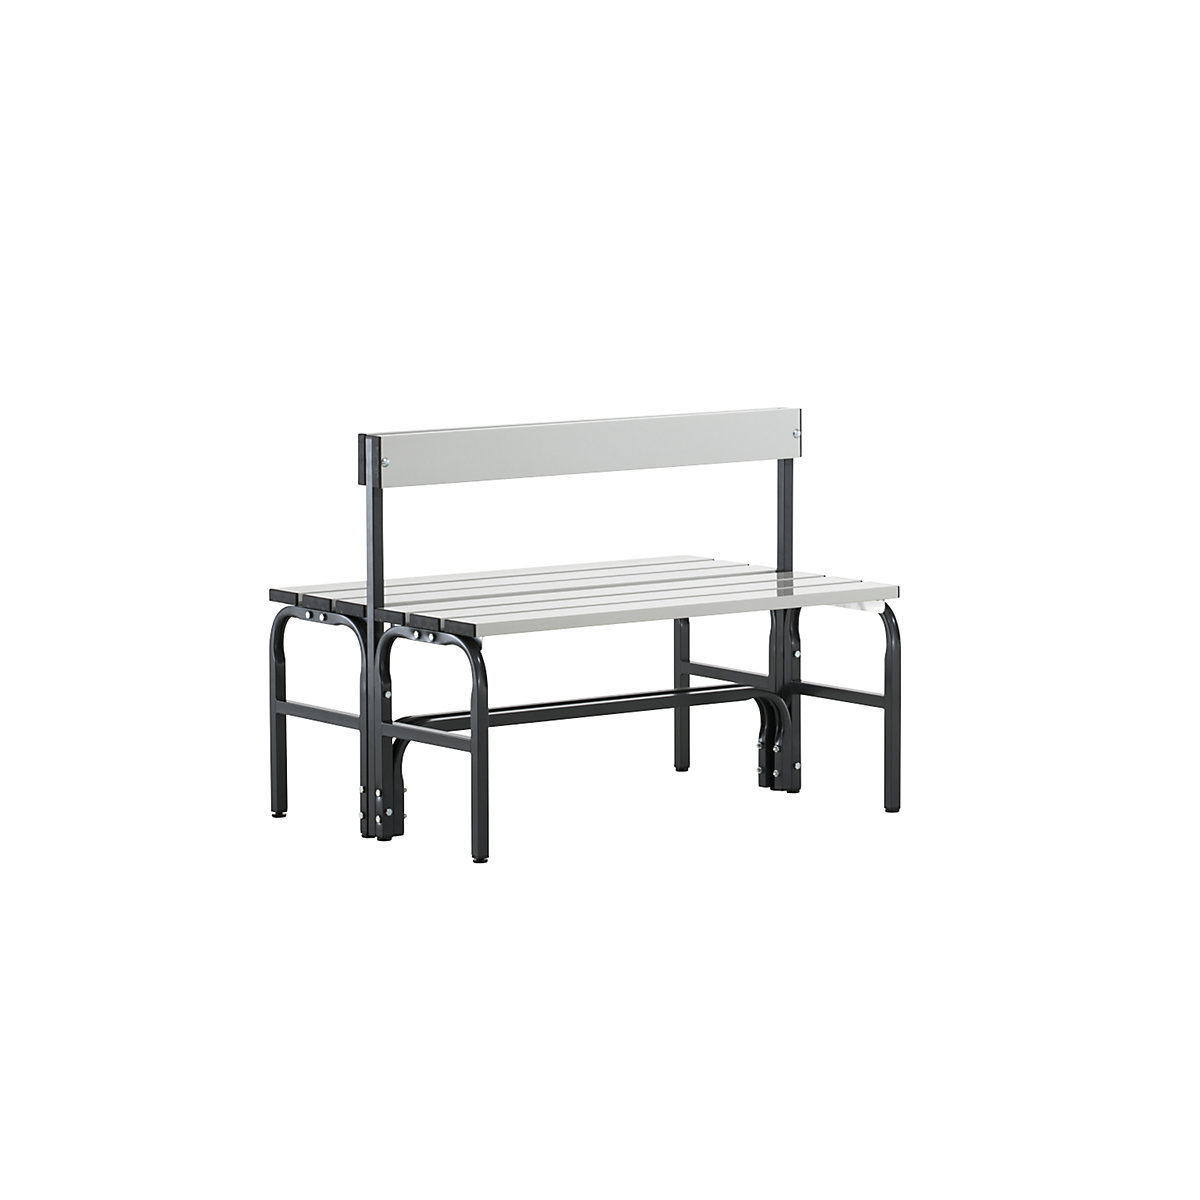 Half height cloakroom bench with back rest, double sided - Sypro